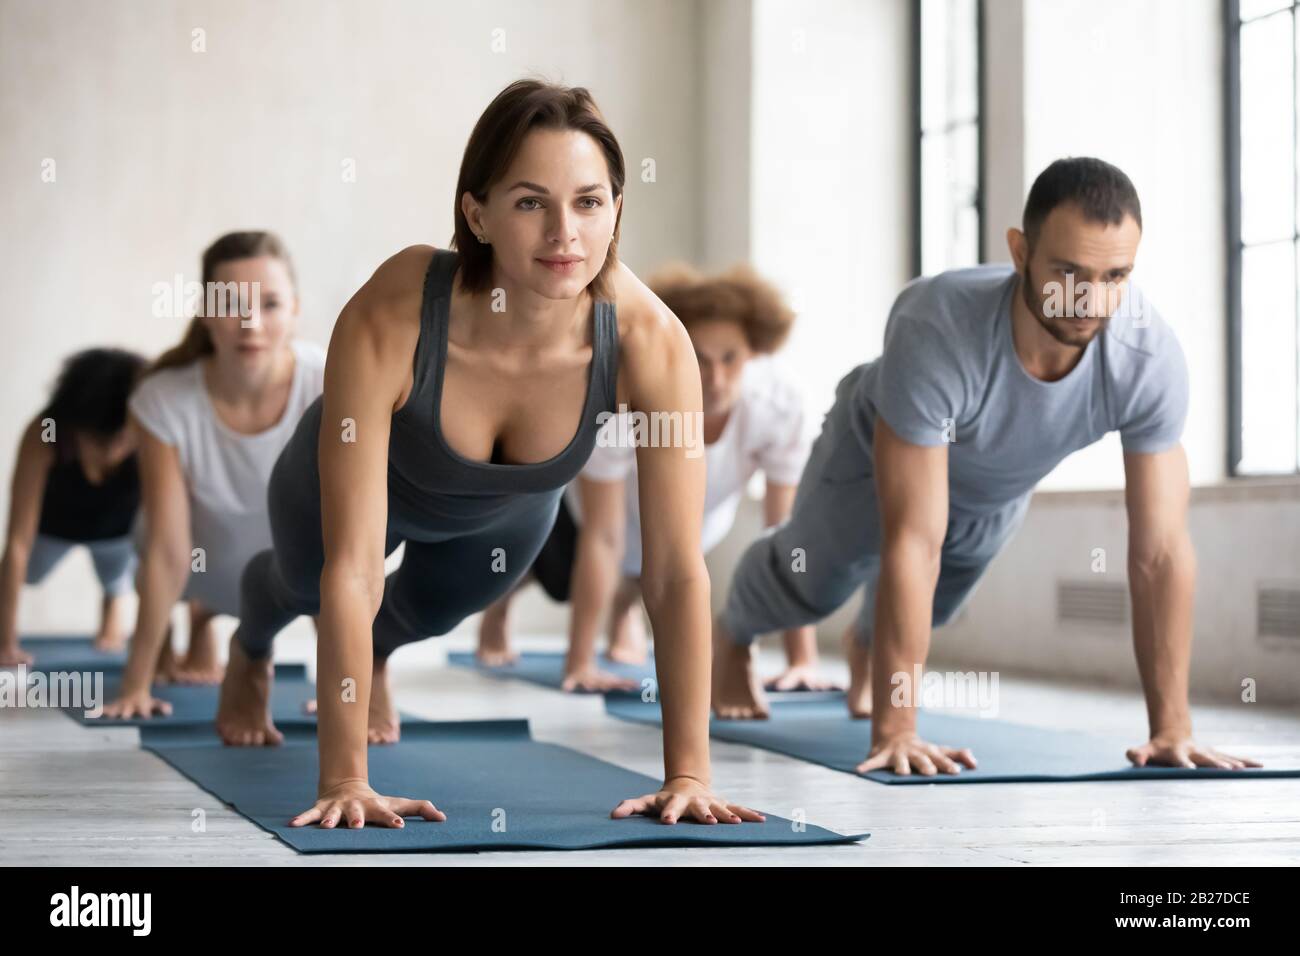 Woman trainer and group of people performing together plank pose Stock Photo